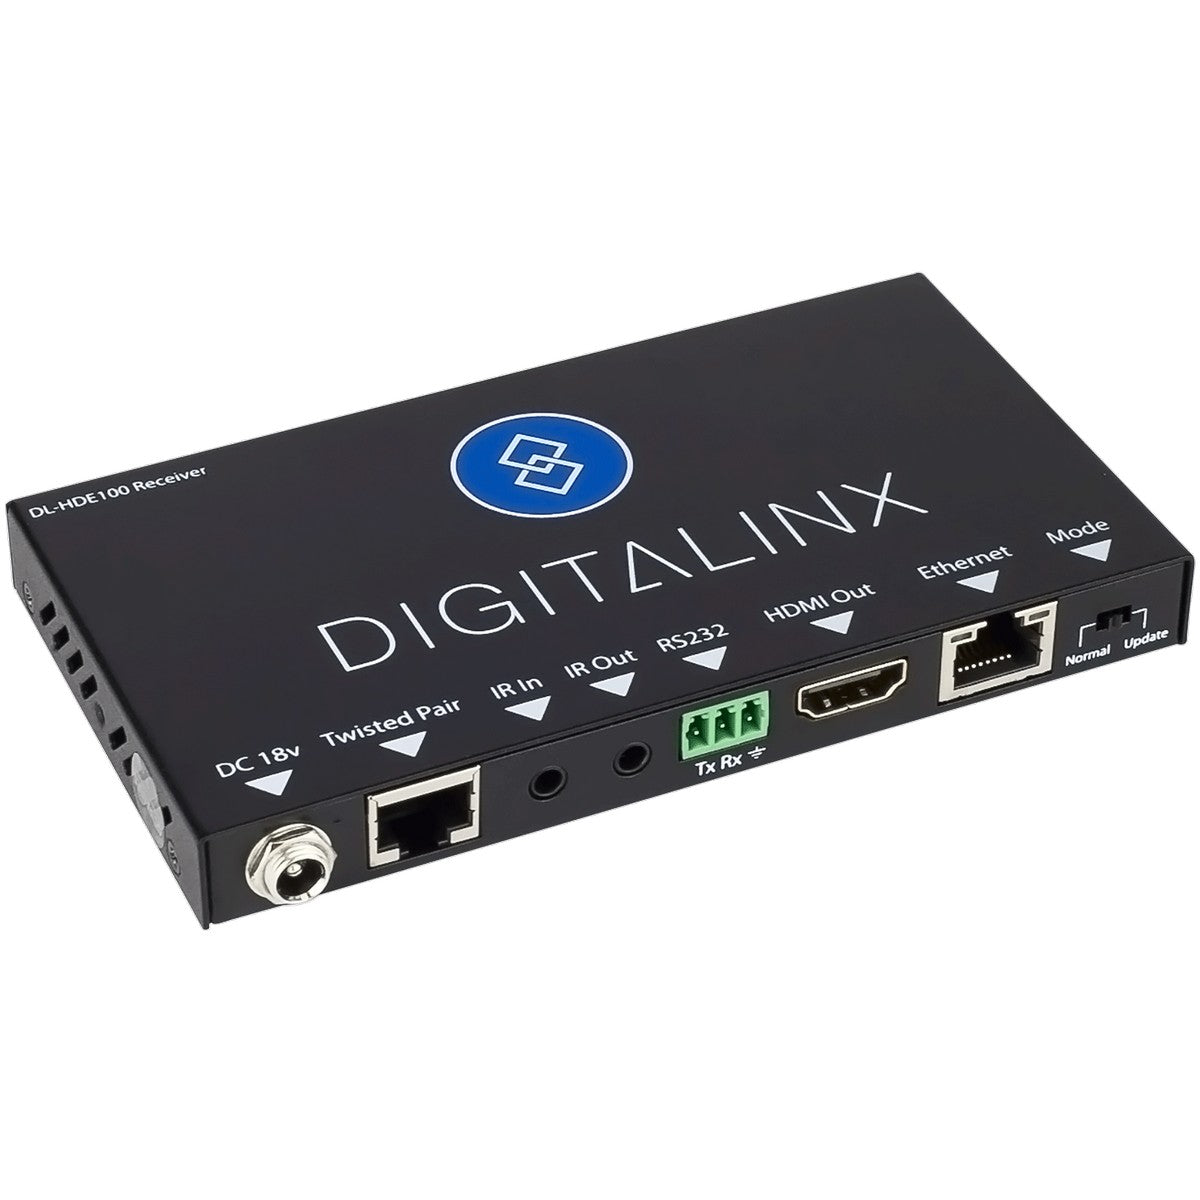 DigitaLinx DL-HDE100 | HDMI Over Twisted Pair Set